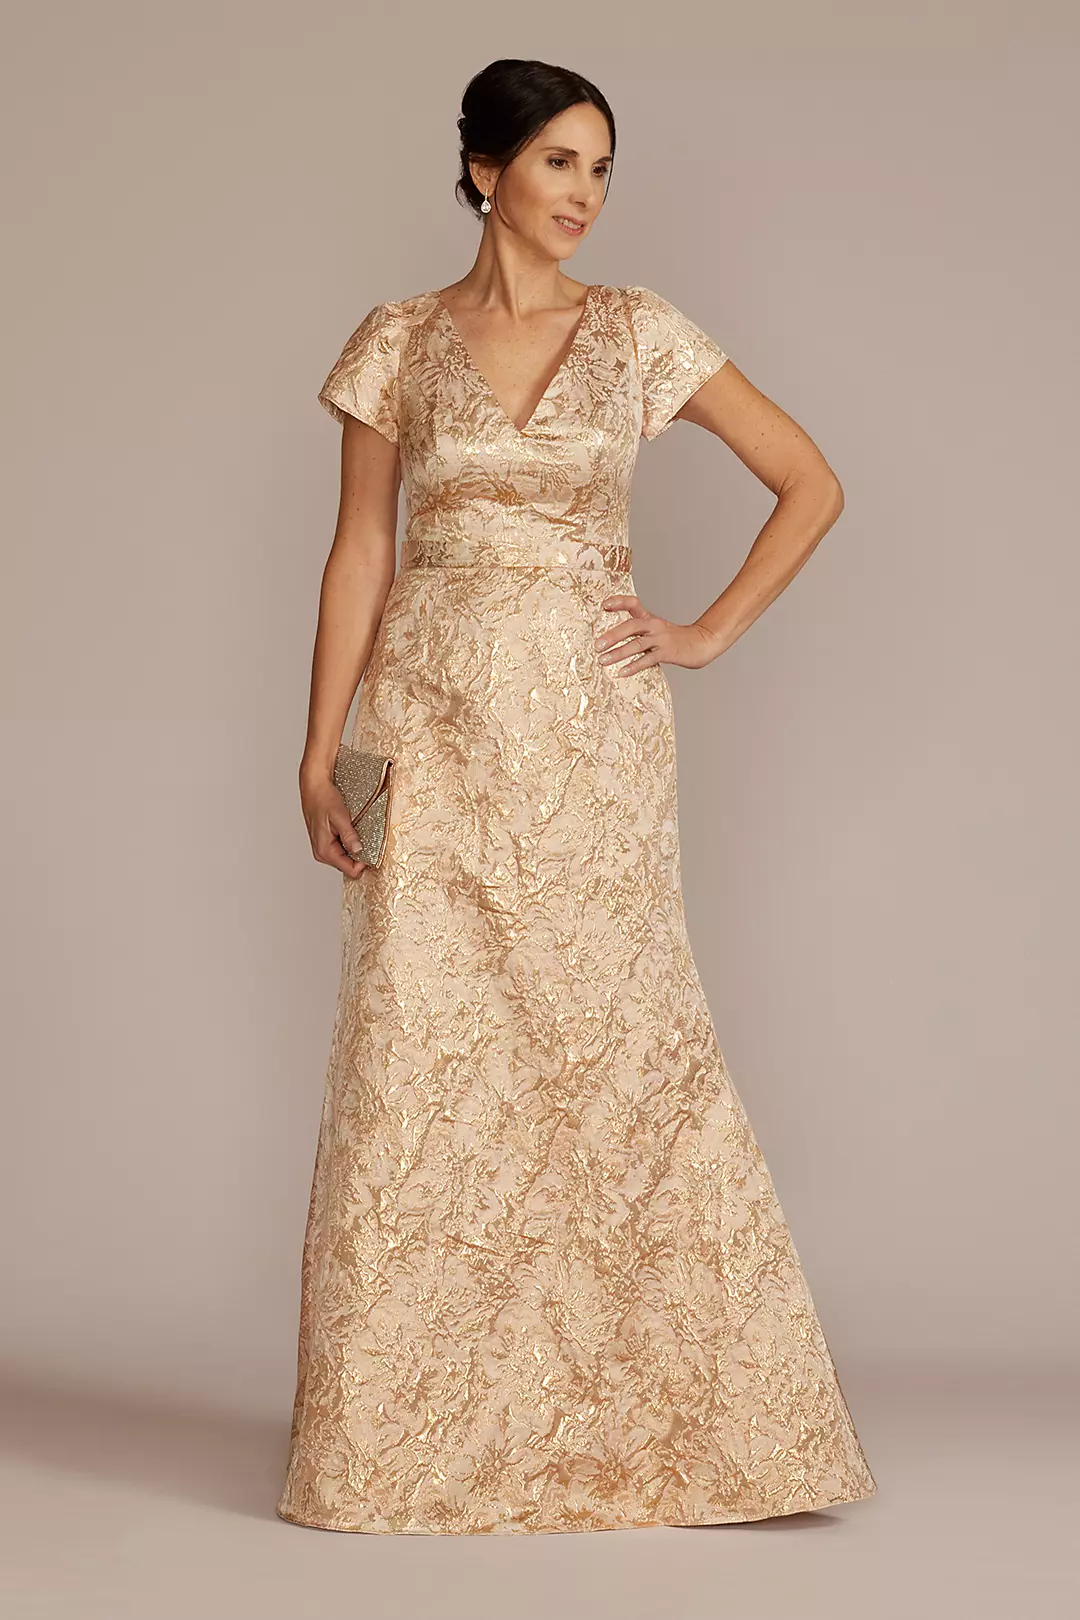 David's Bridal debuts collection of 'eco-minded' gowns - Bizwomen